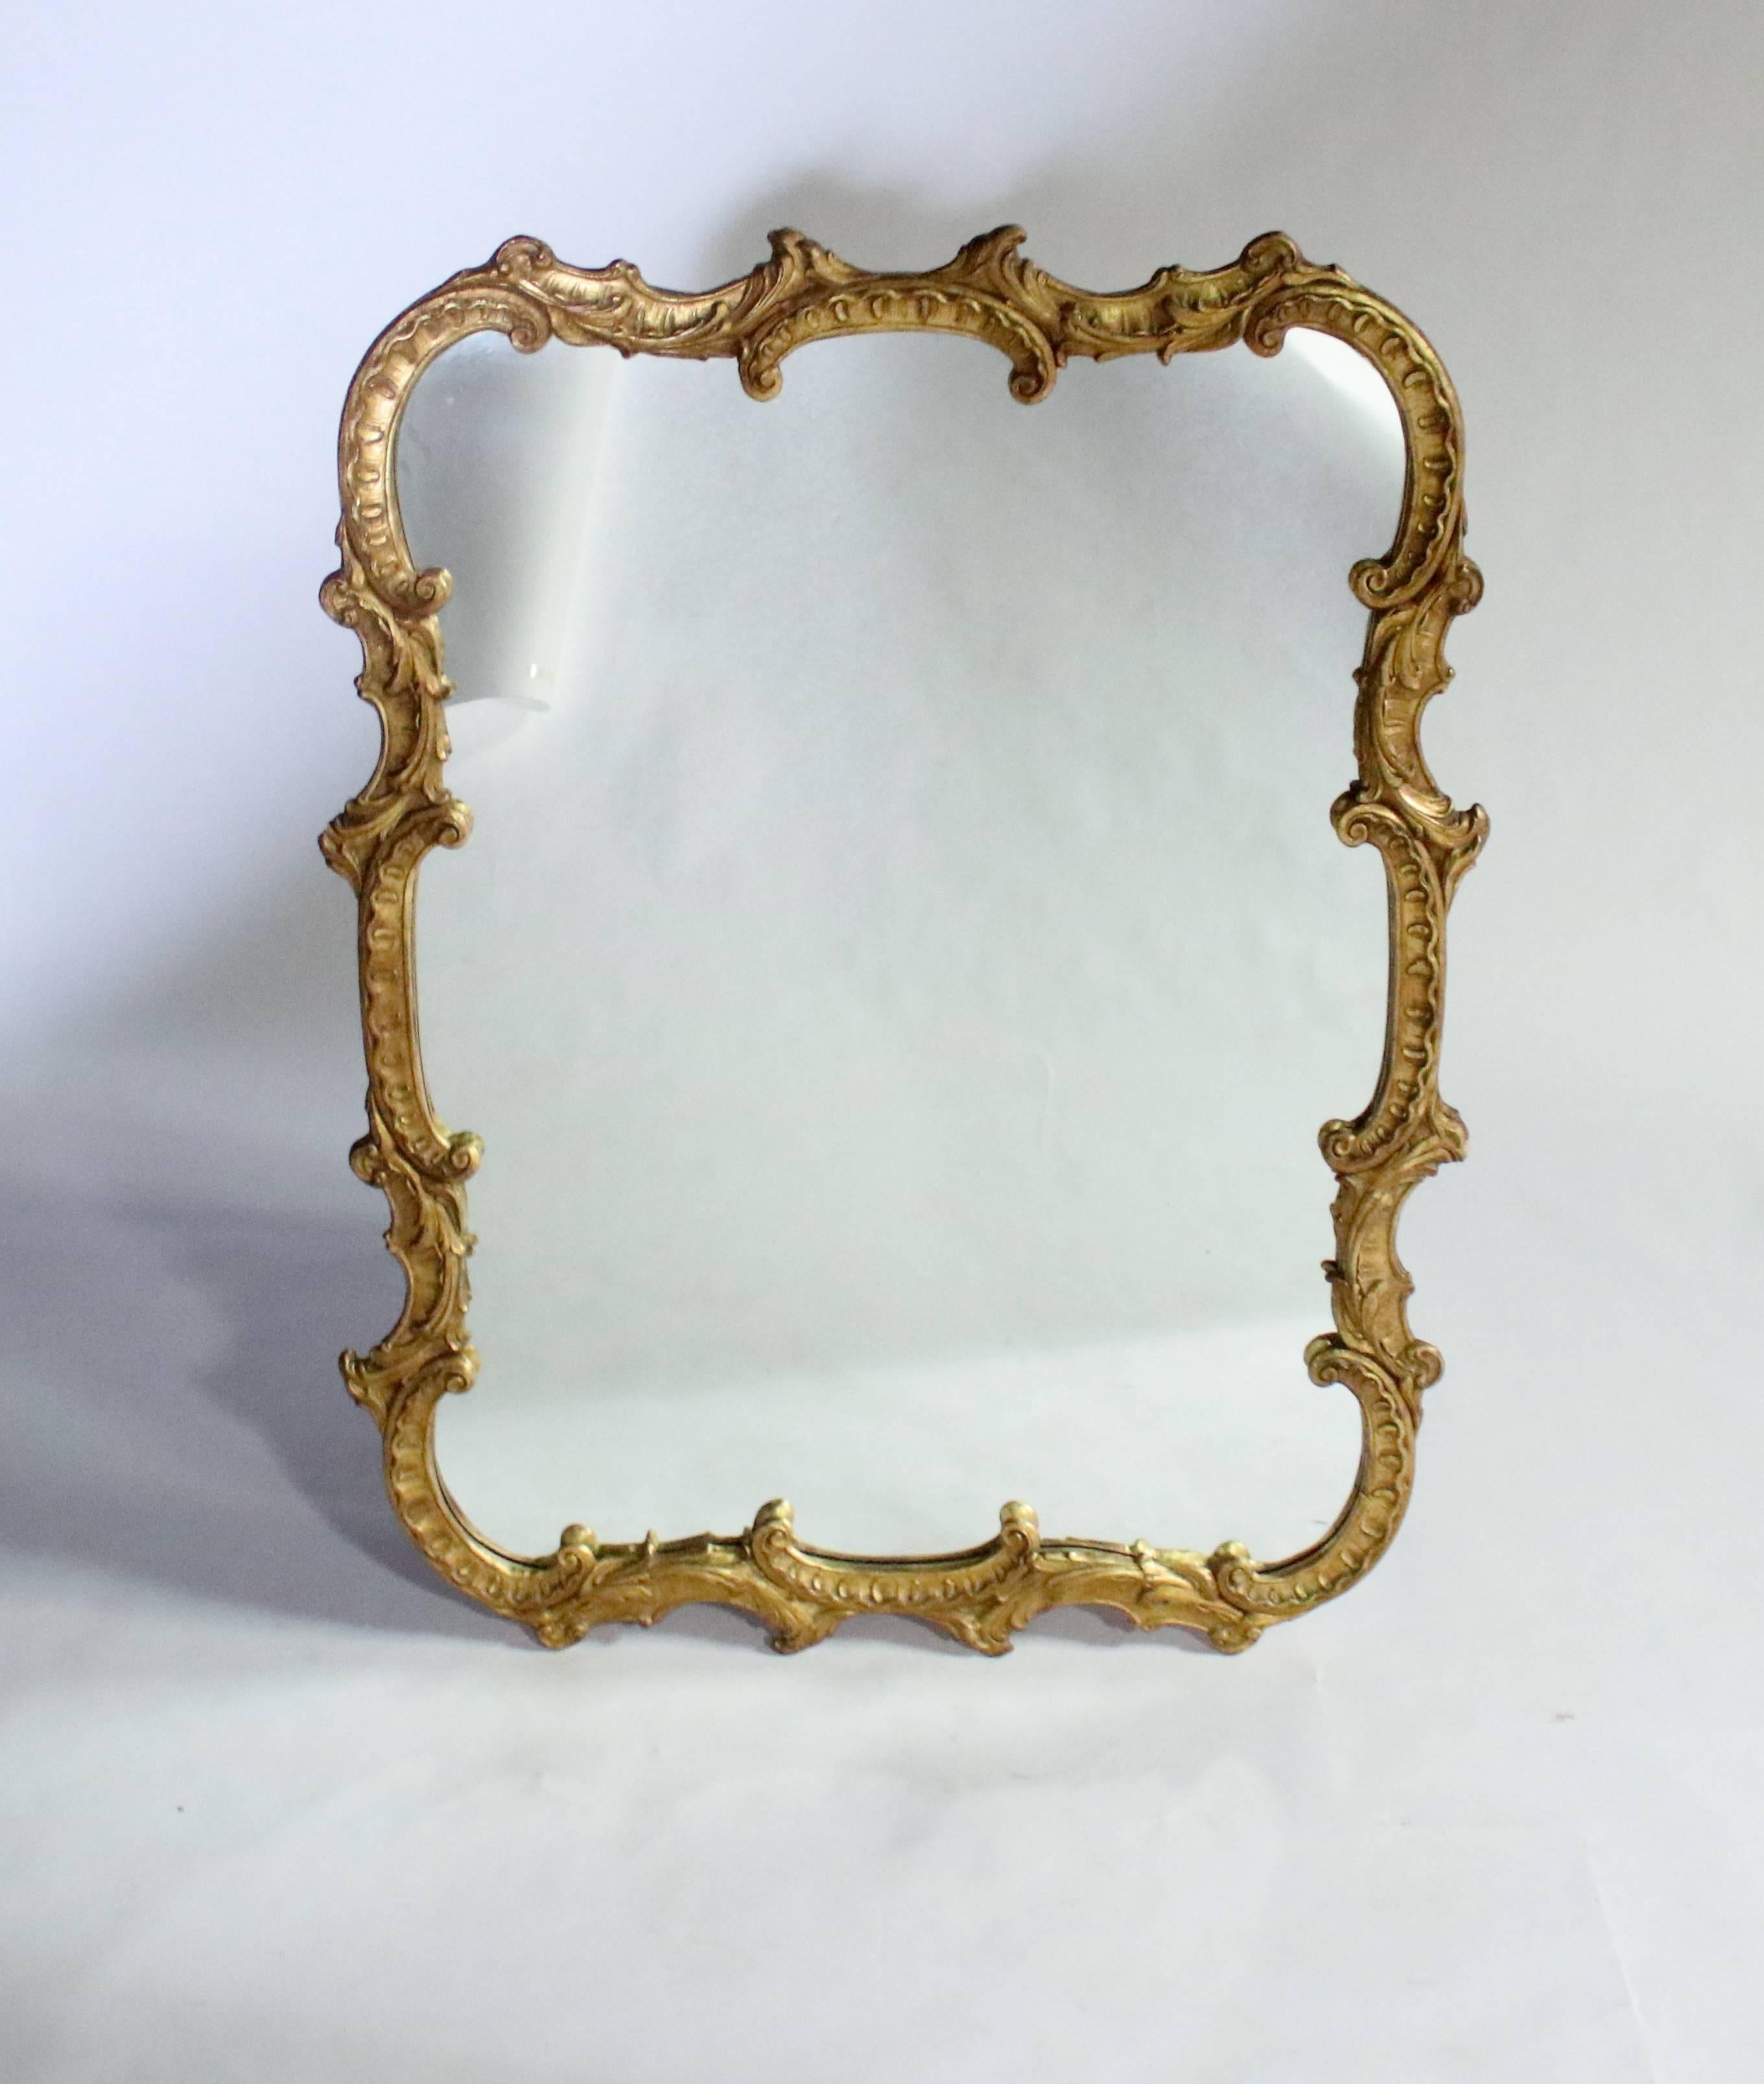 Early 20th century antique Georgian-style ornate mirror with carved plaster scrolls and wood backing. Ready to hang vertically or horizontally. Possibly Italian made.